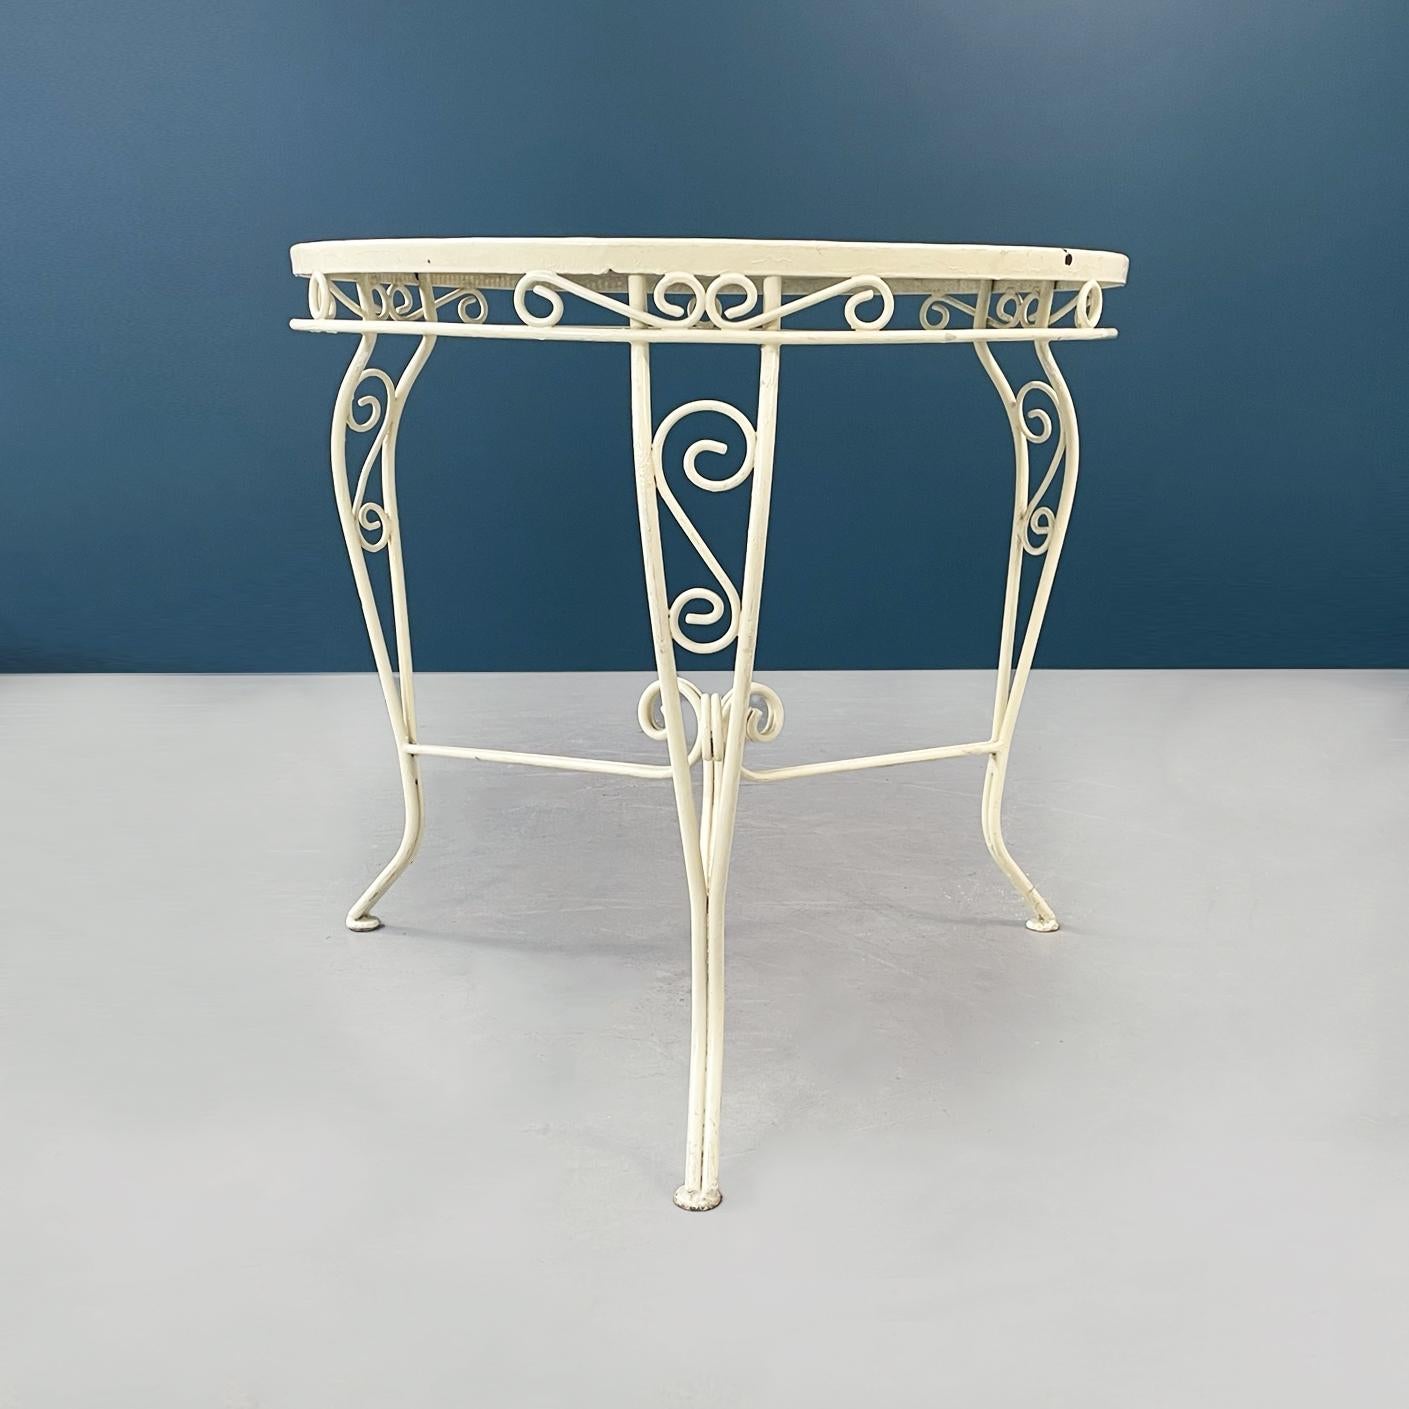 Italian Mid-Century Modern Garden Table in White Wrought Iron, 1960 In Good Condition For Sale In MIlano, IT